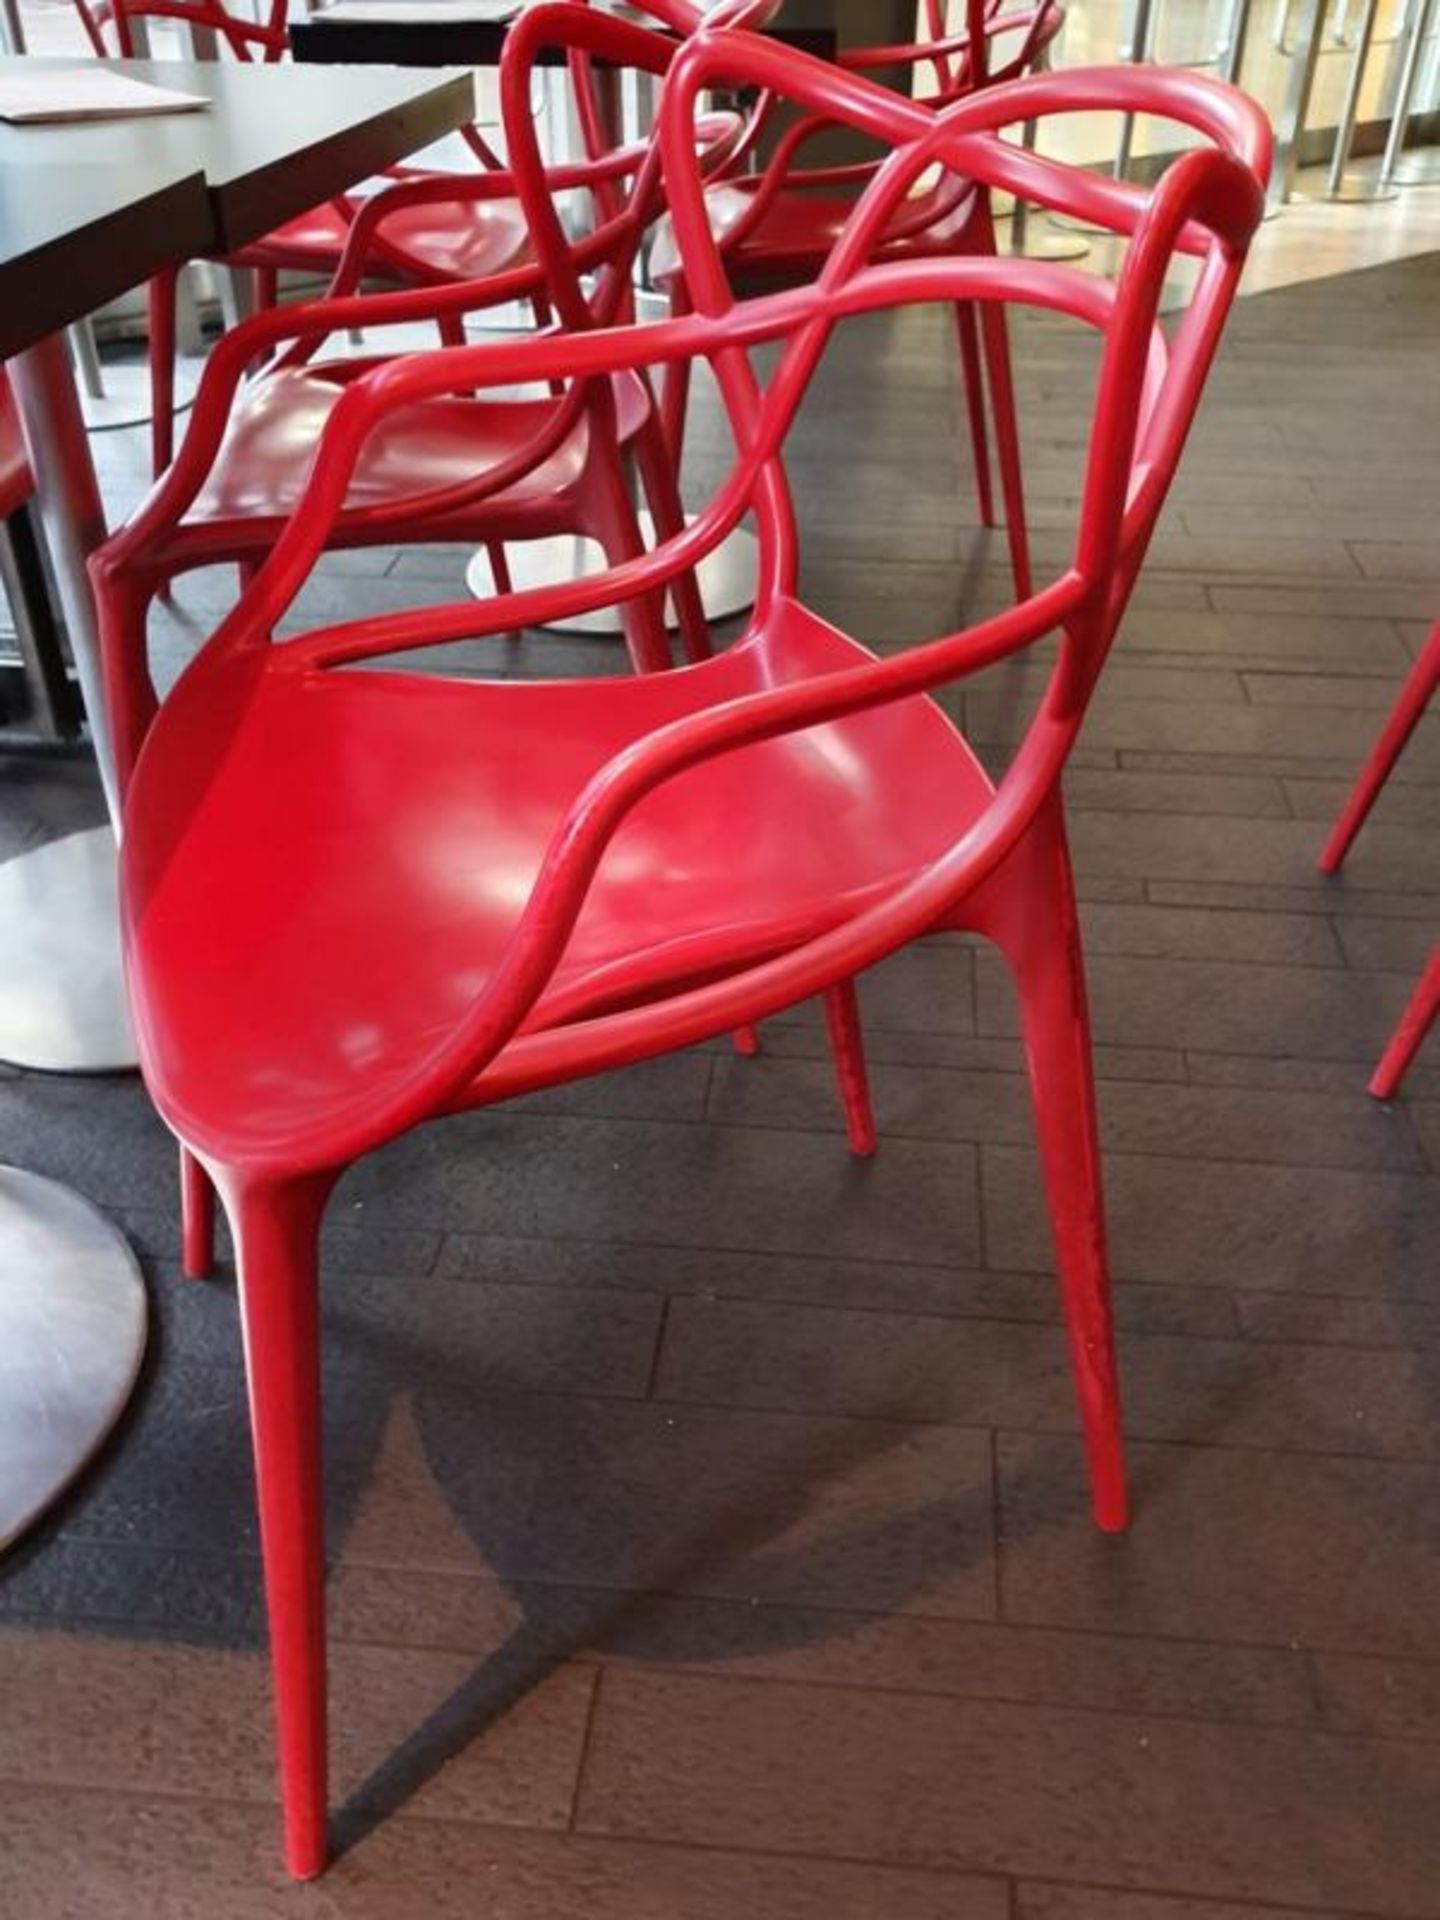 12 x Philippe Starck For Kartell 'Masters' Designer Bistro Chairs - Includes 10 x Red And 2 x Black - Image 4 of 6